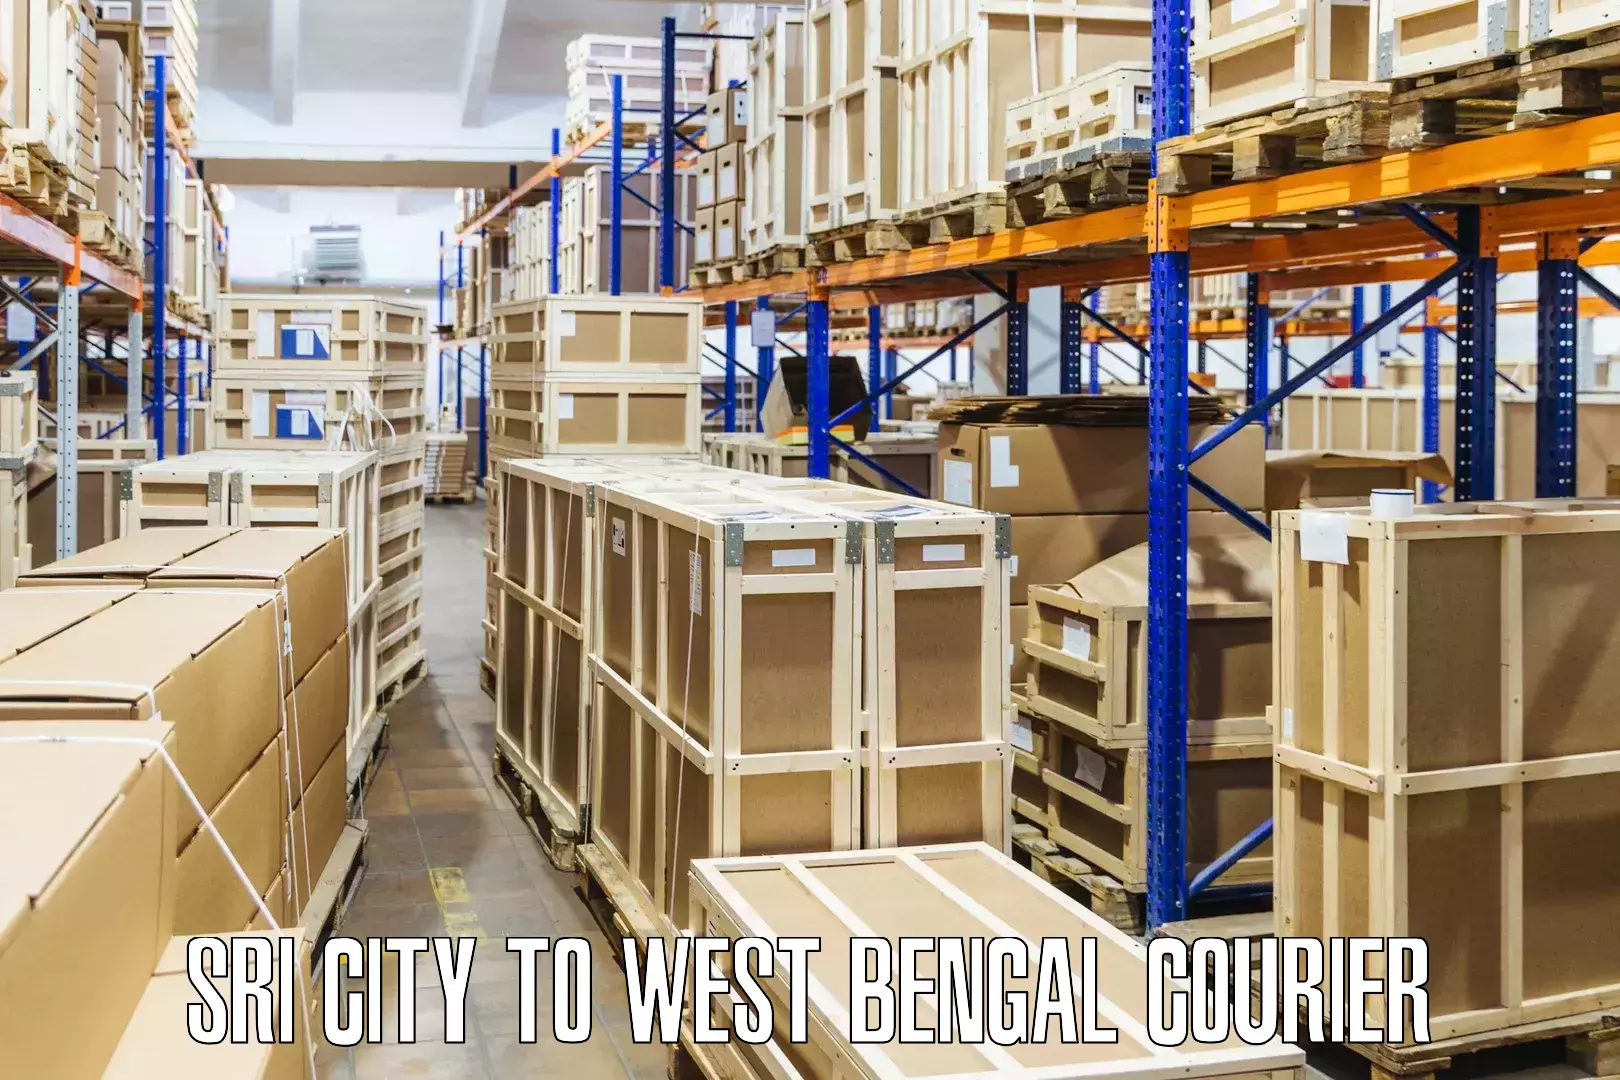 Global shipping networks Sri City to West Bengal